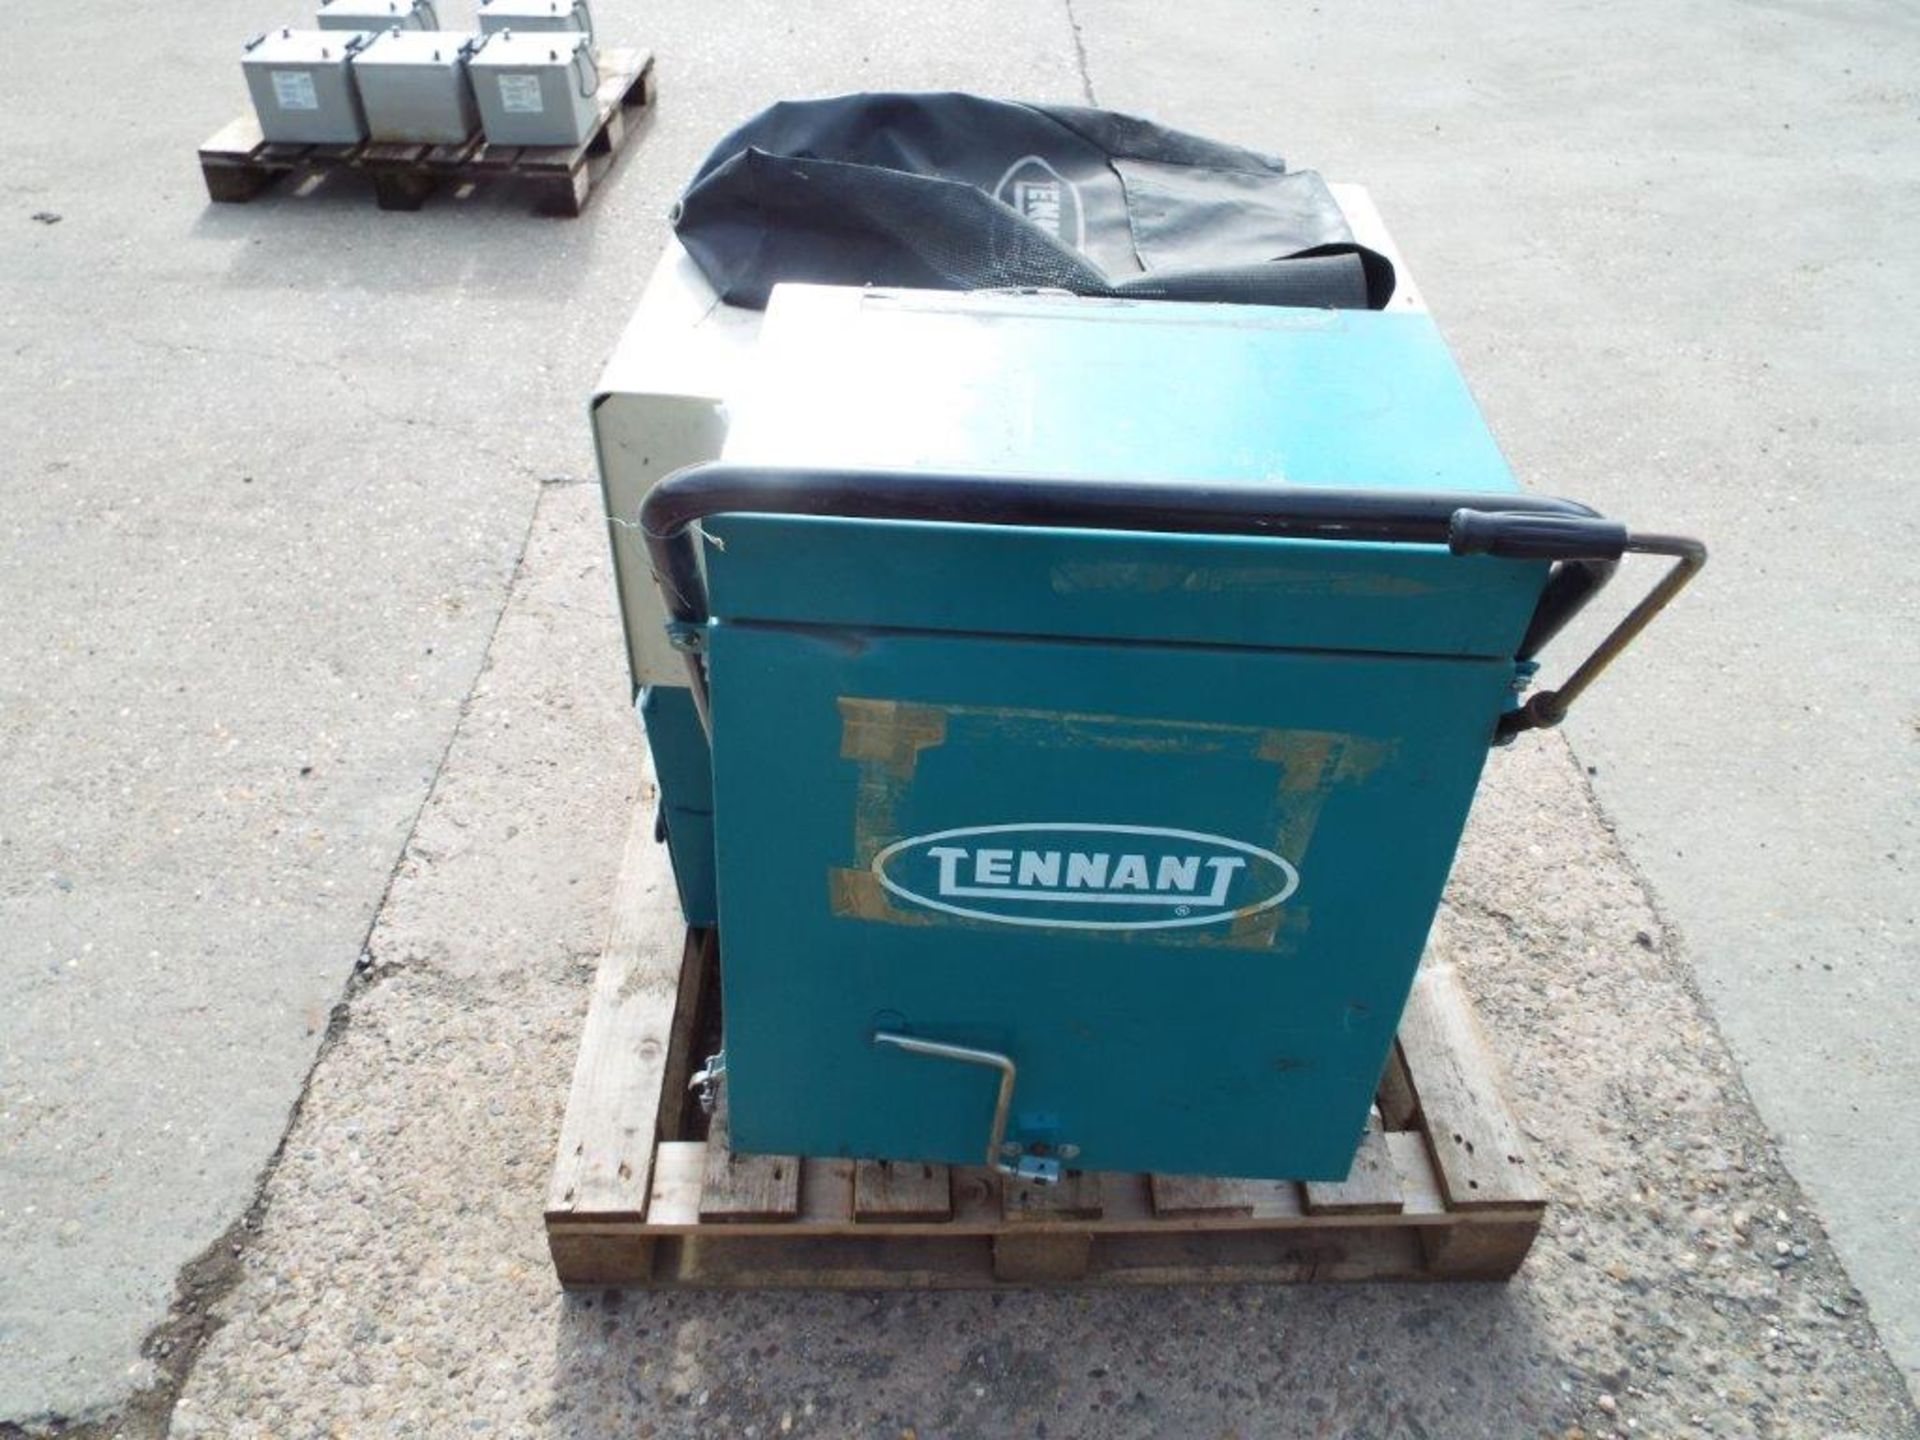 Tennant 42E Walk Behind Electric Sweeper - Image 4 of 12